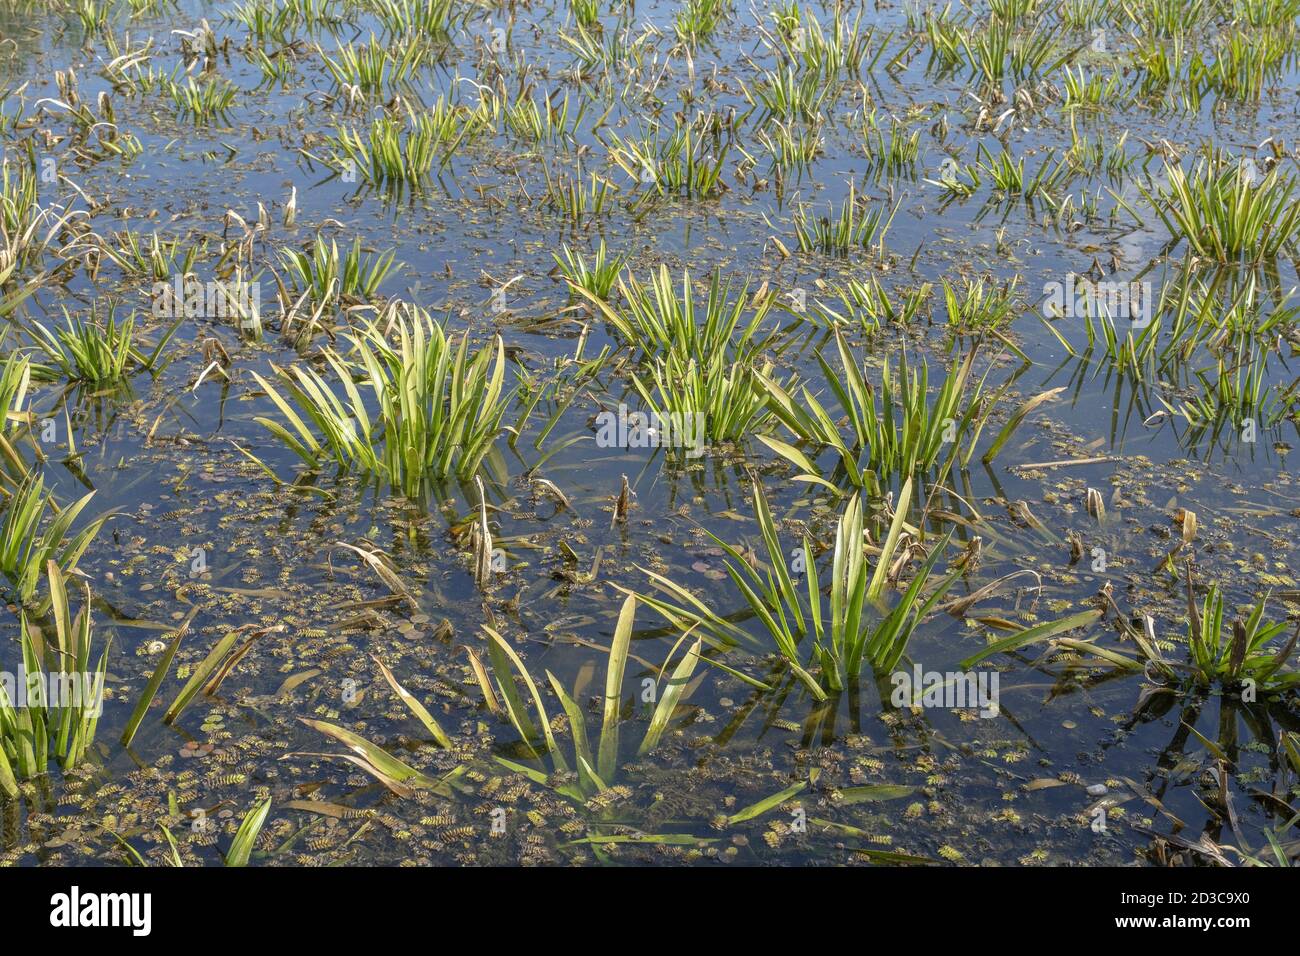 aquatic plant Water-soldier or water pineapple (Stratiotes aloides) Stock Photo